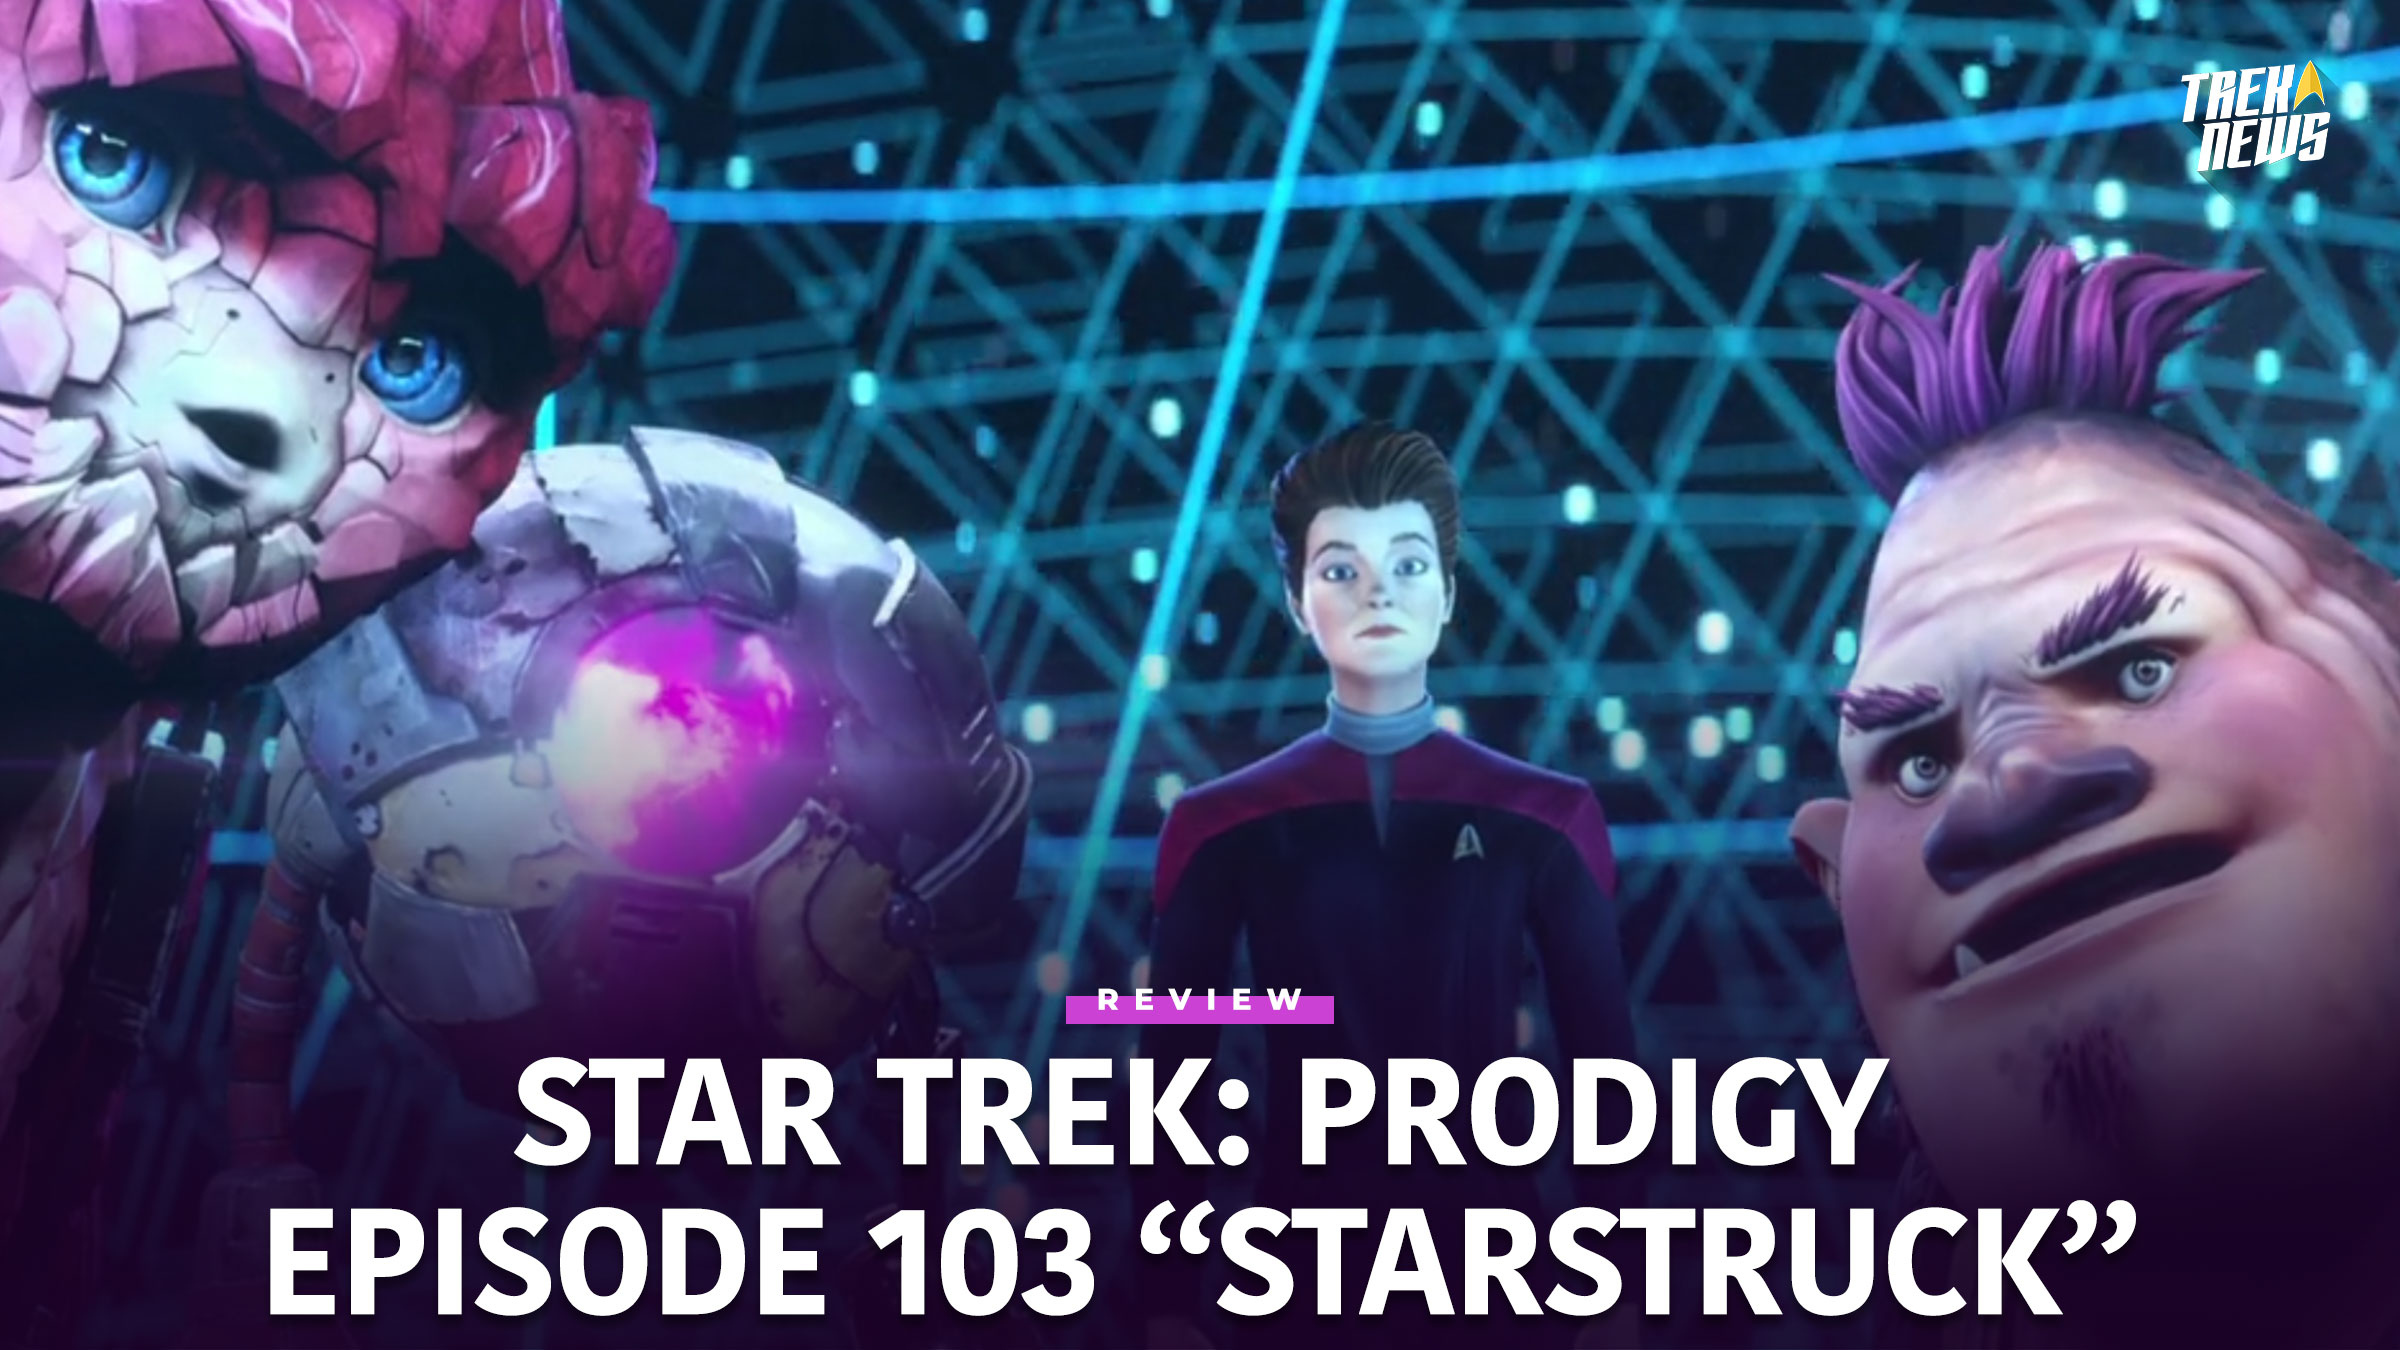 Star Trek: Prodigy Episode 103 “Starstruck” Review: Out Of The Frying Pan, Into The Fire